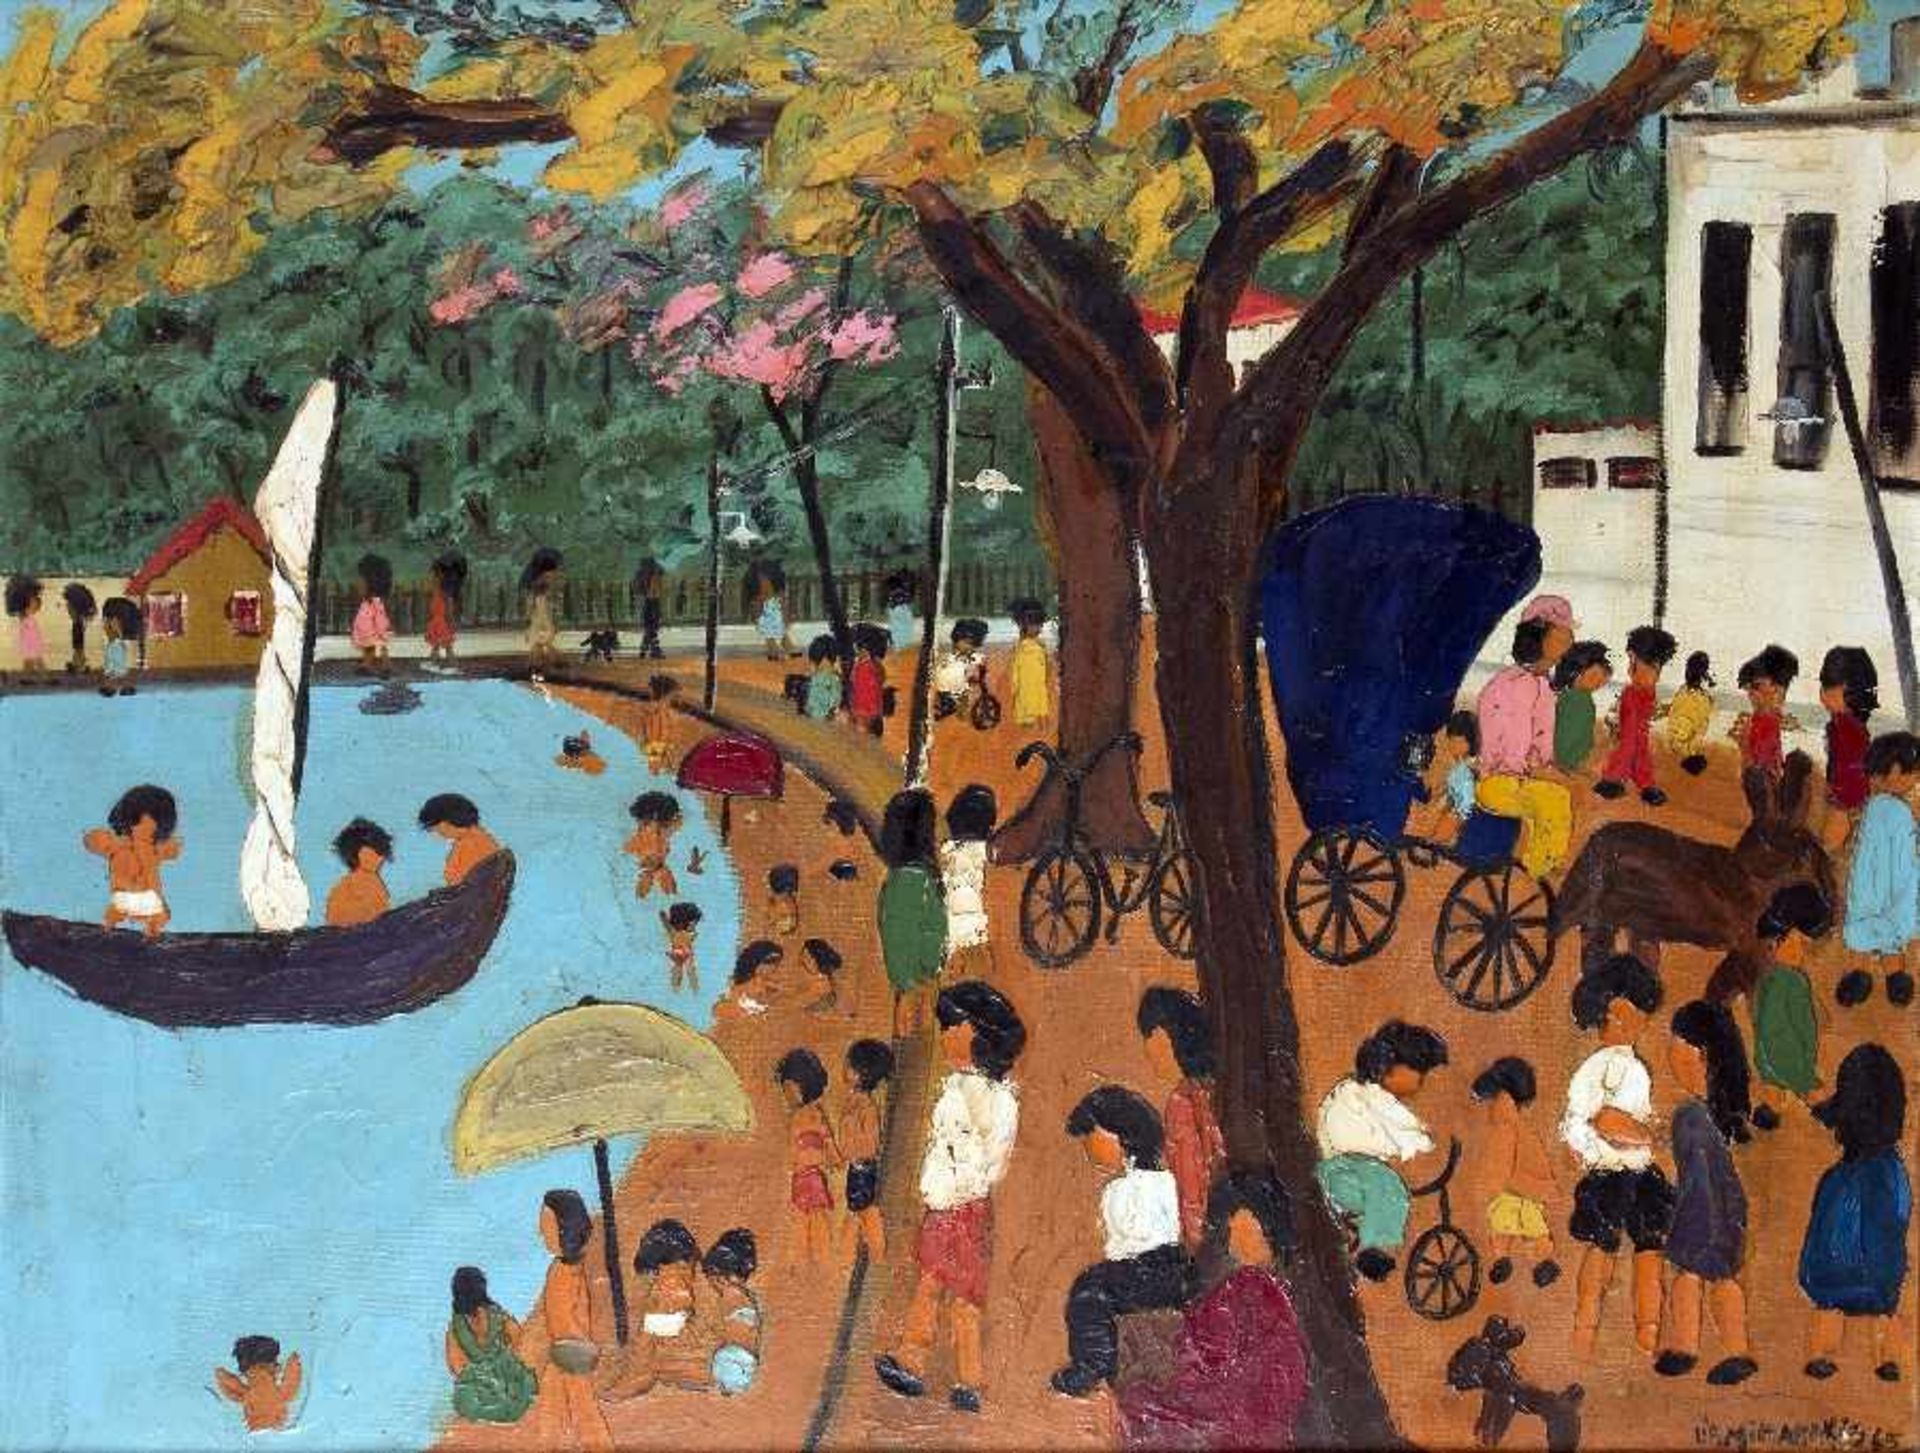 Lia Mittarakis1934 - 1998At the city beachOil on canvas, 1965; H 50 cm, W 65 cm; signed and dated